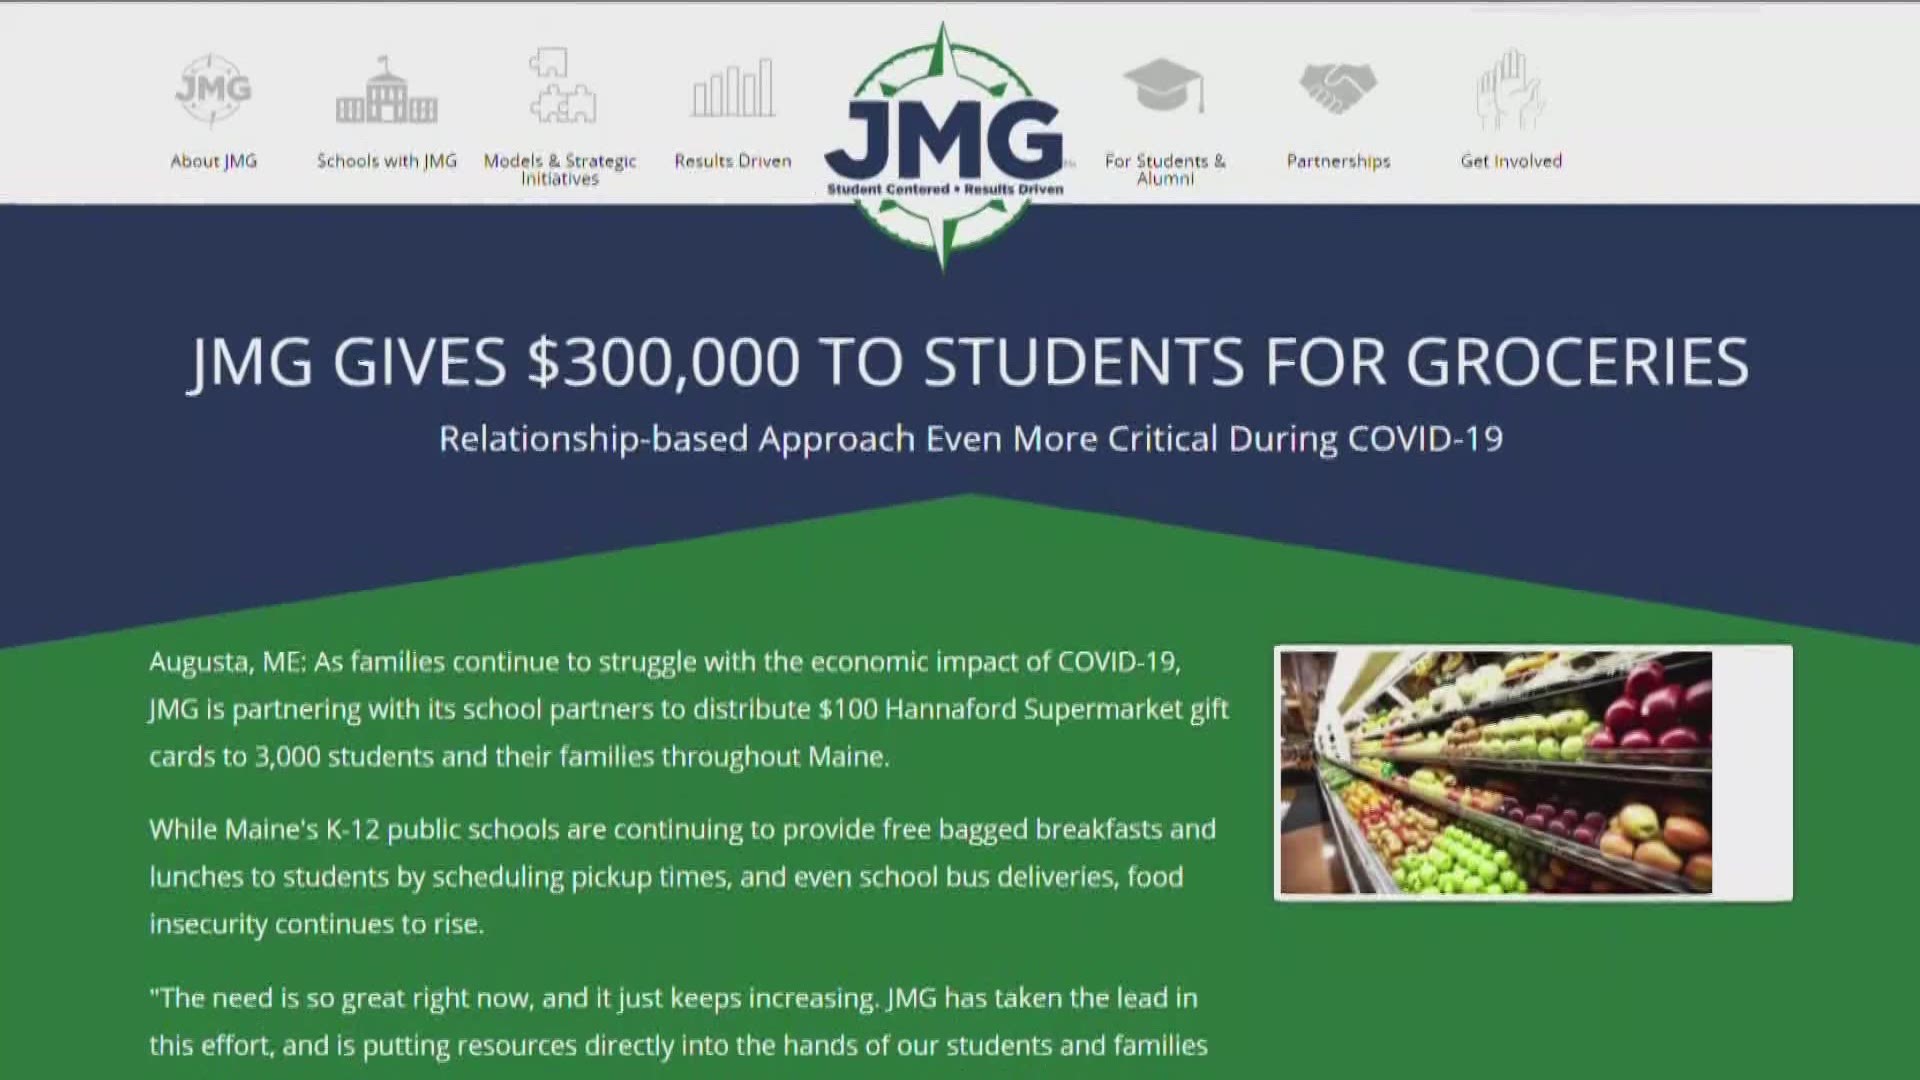 JMG gives Hannaford gift cards to Maine students for groceries during coronavirus, COVID-19 pandemic